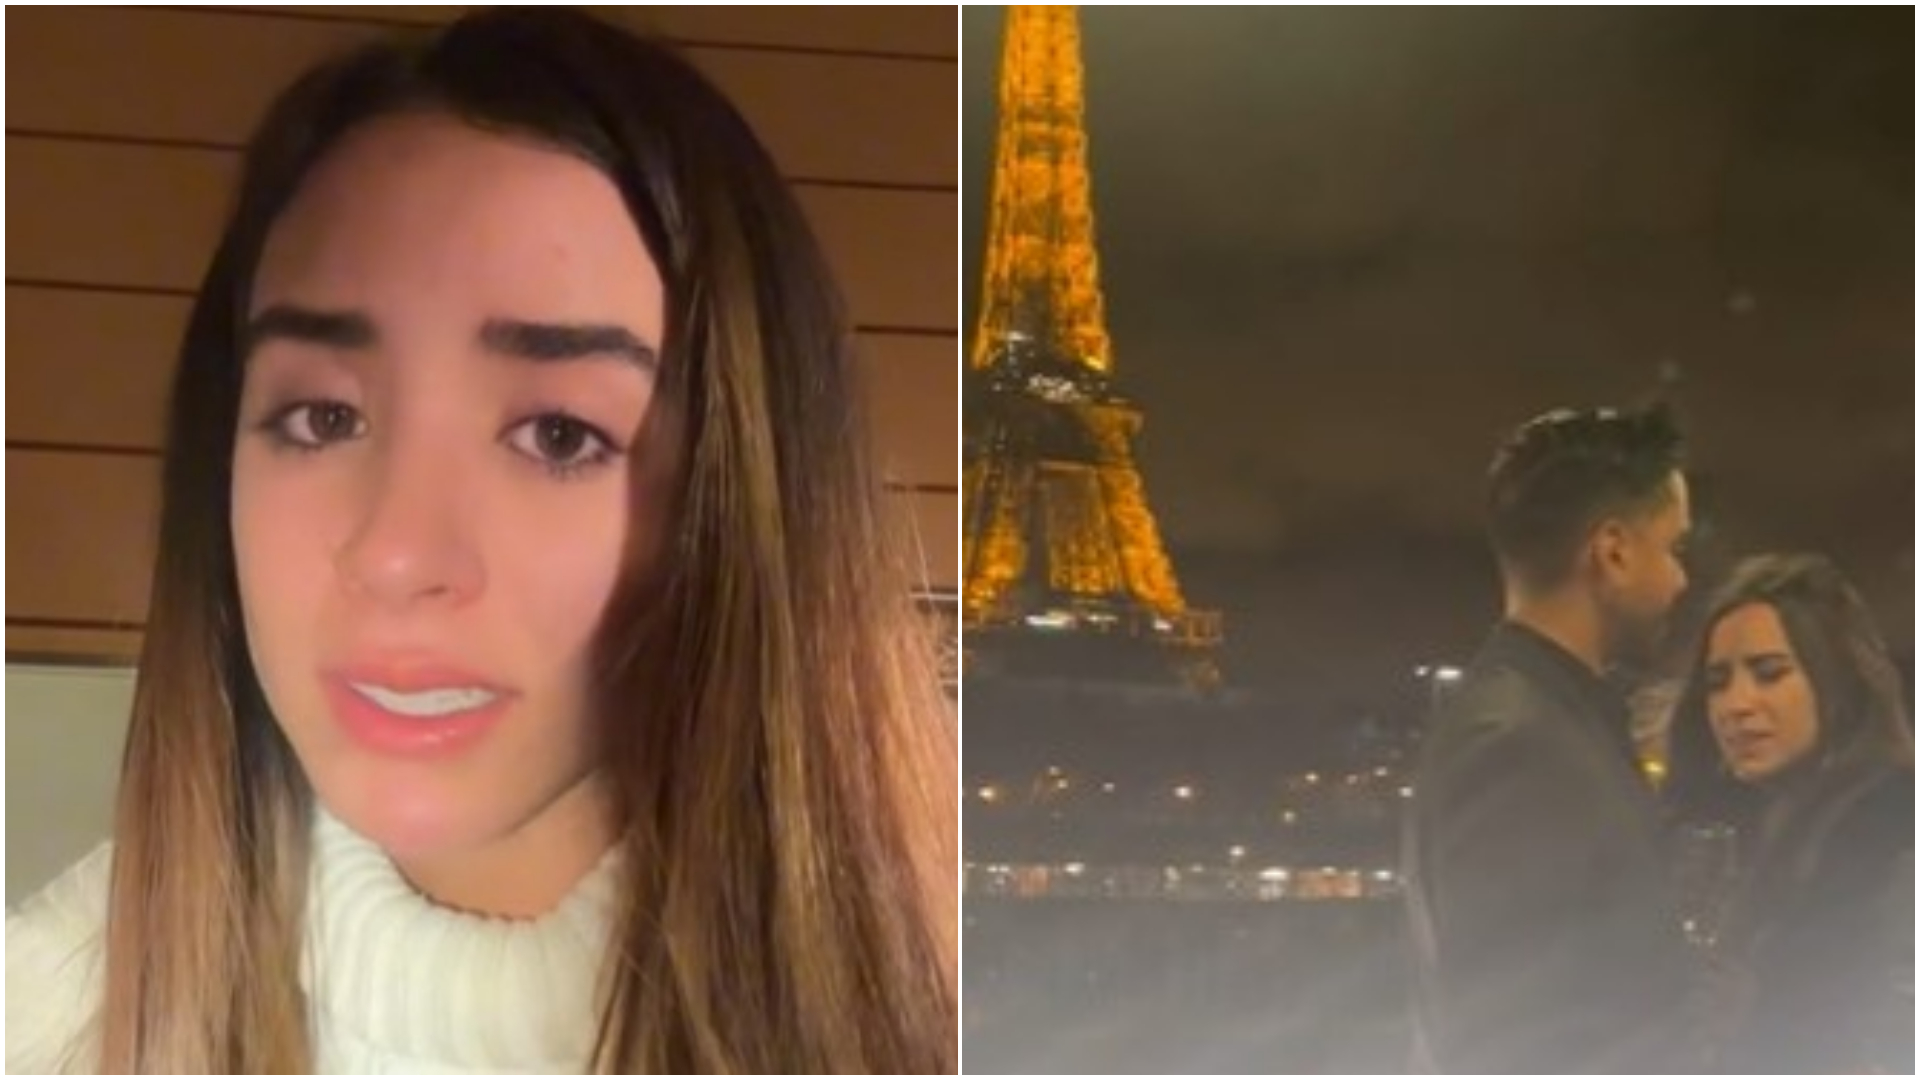 Tammy Parra assured that she does not need a man (TikTok/@tammy.parra)